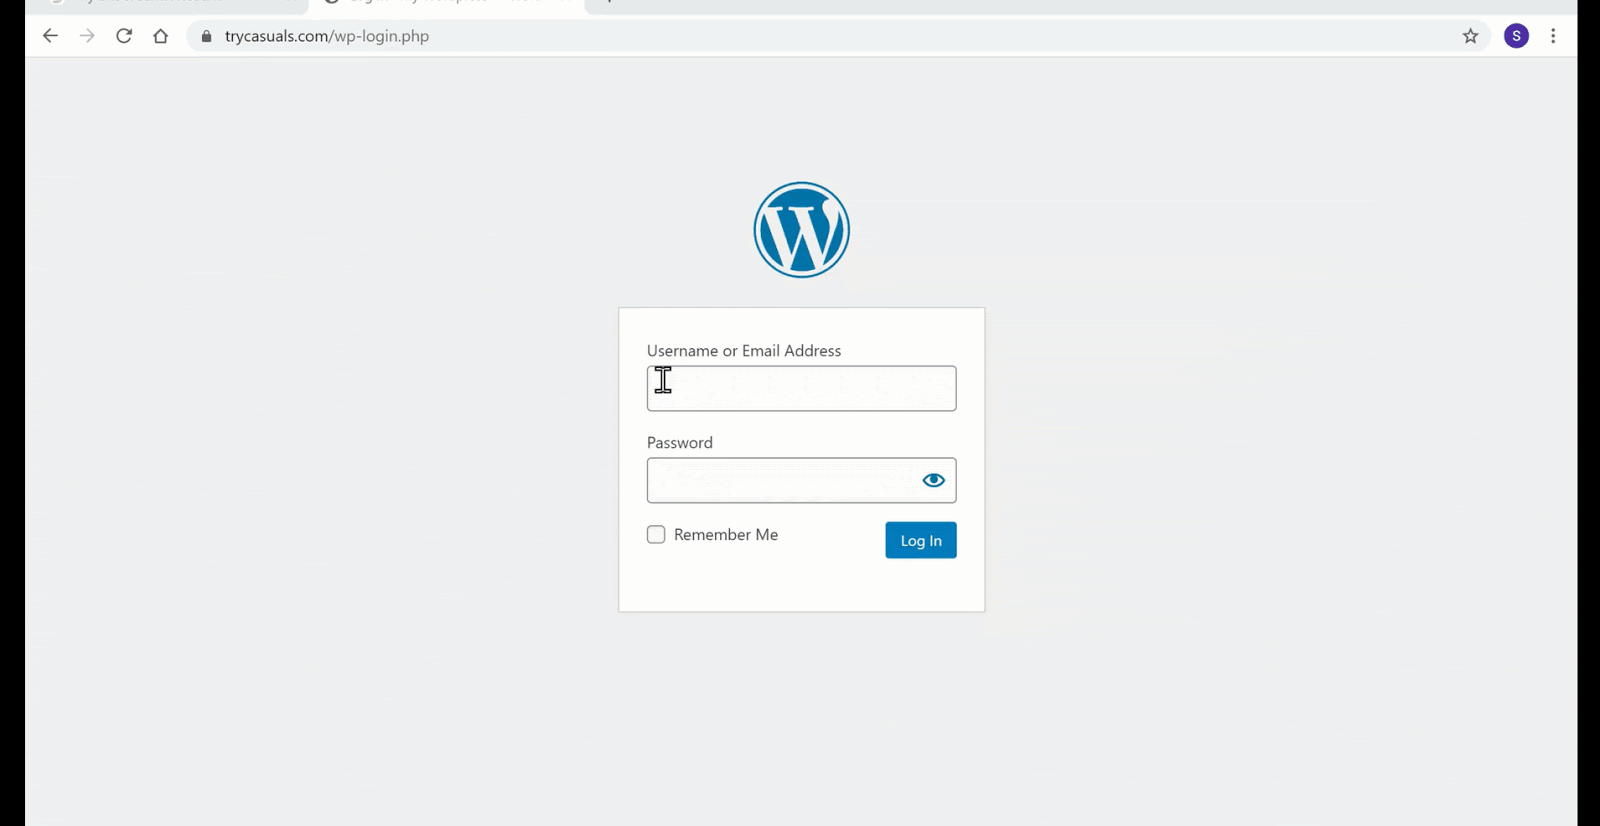 login page - Enter Username and Password